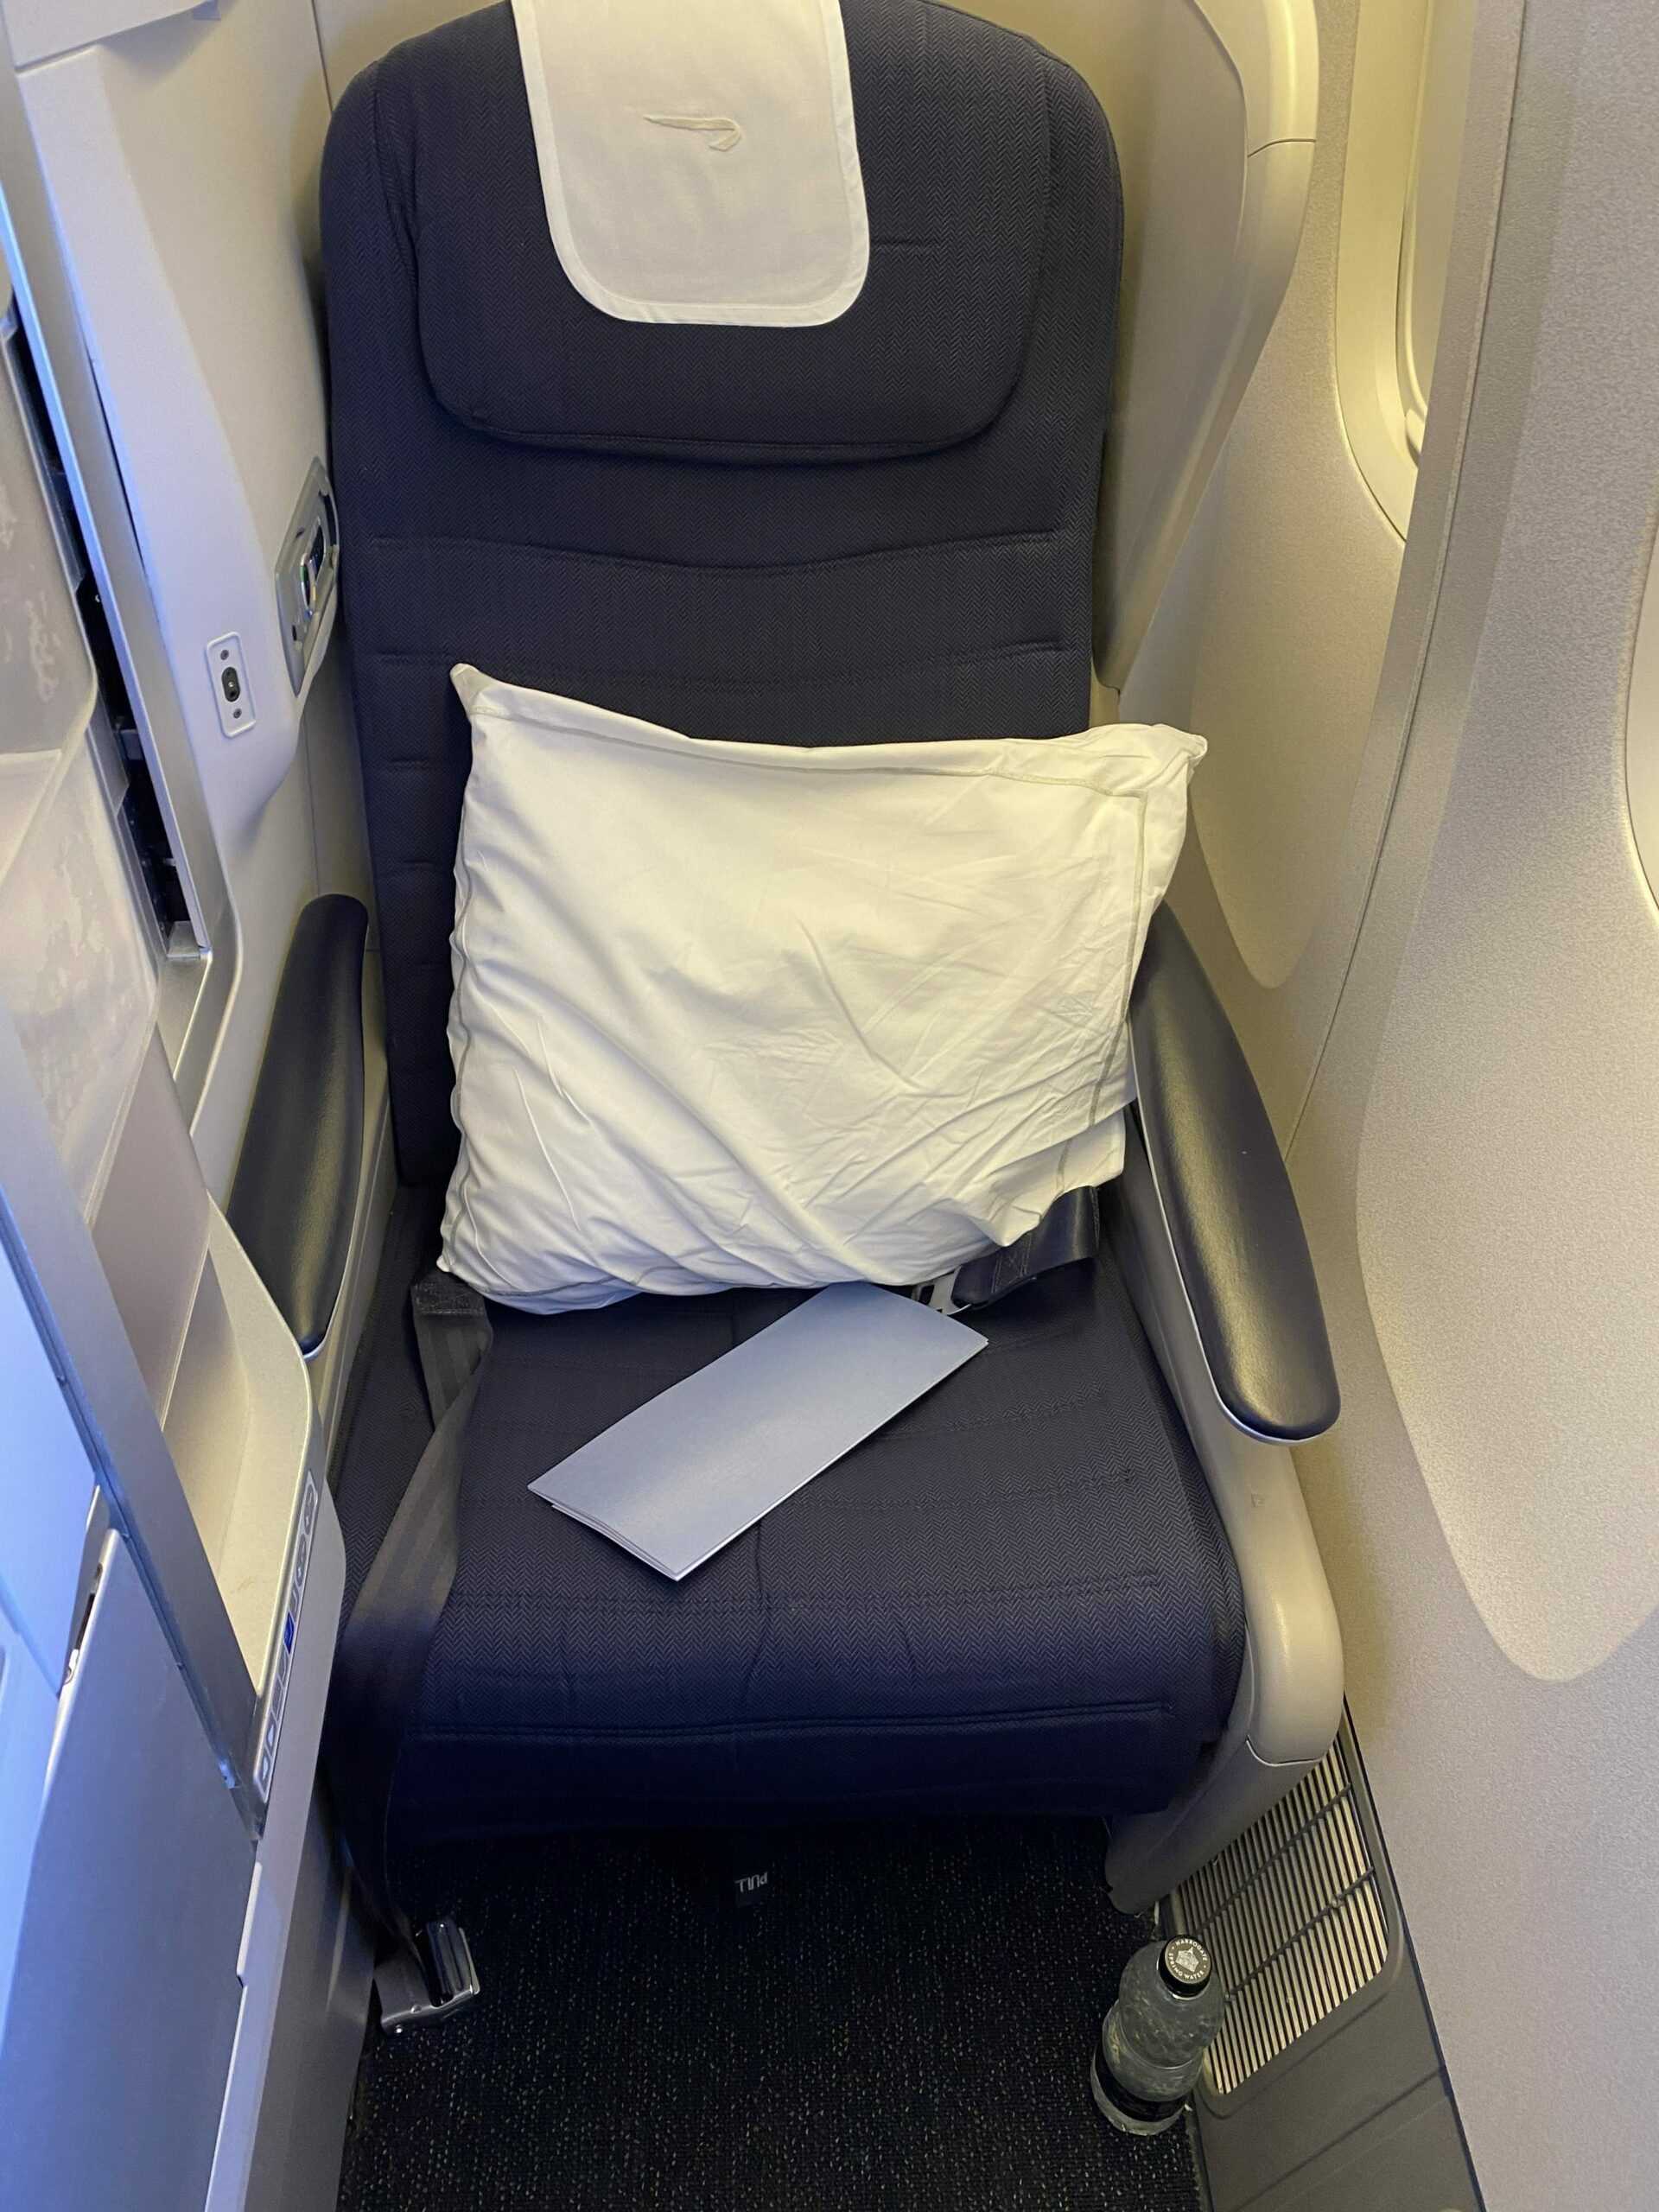 British Airways Club World B777-300ER Heathrow to Los Angeles review &#8211; Turning left for less IMG 2002 scaled